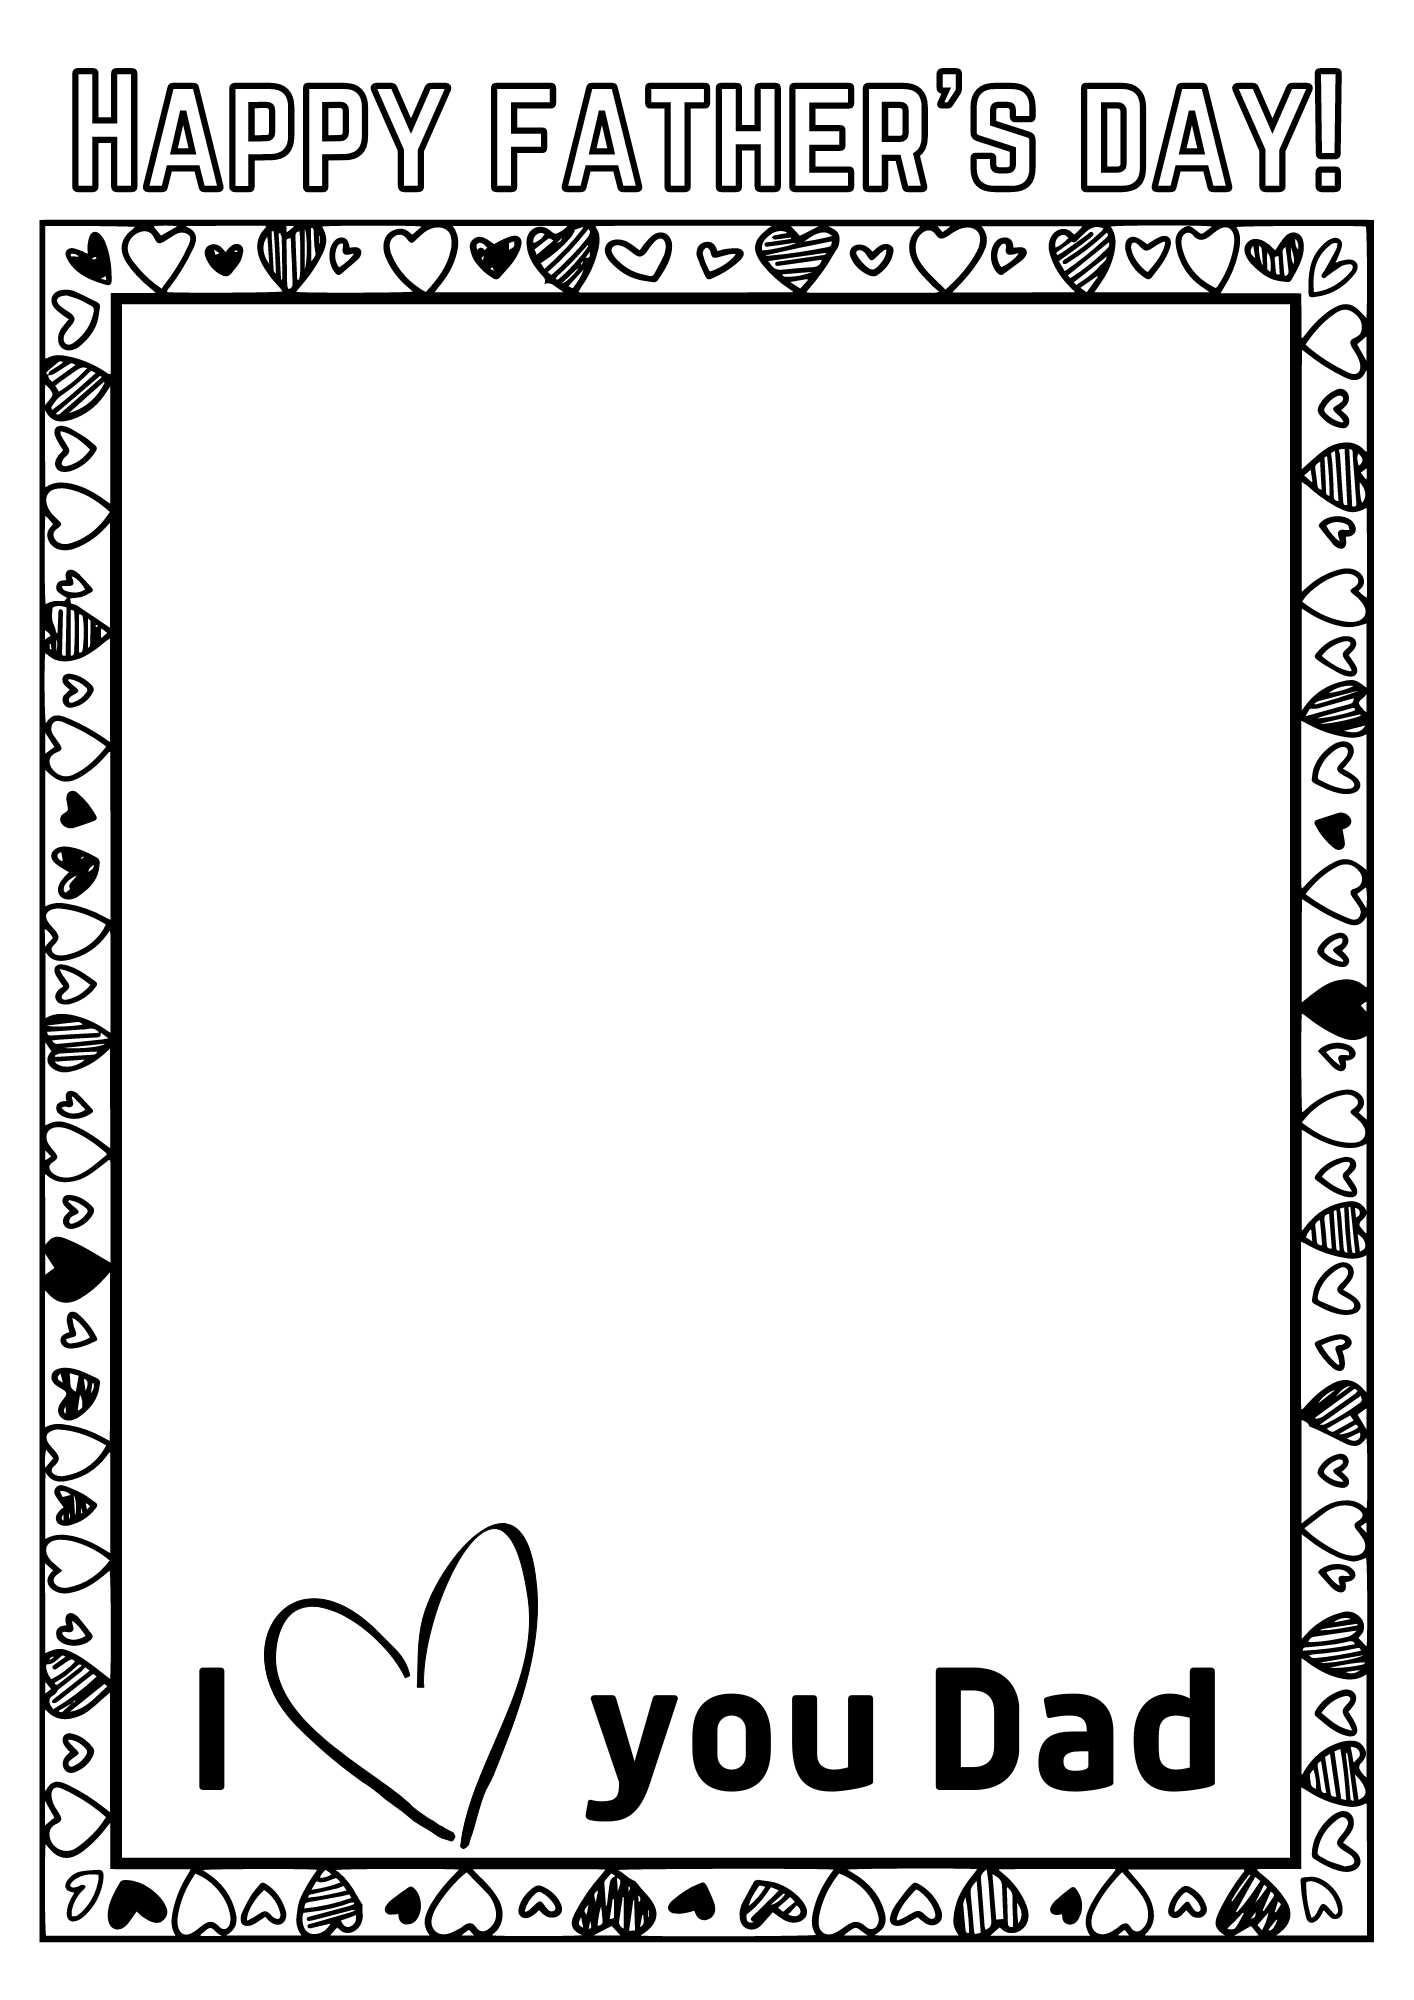 Father's Day Poems, Quotes, Coloring Pages, Coupon Books And More! | Fathers  day poems, Fathers day coloring page, Happy fathers day images